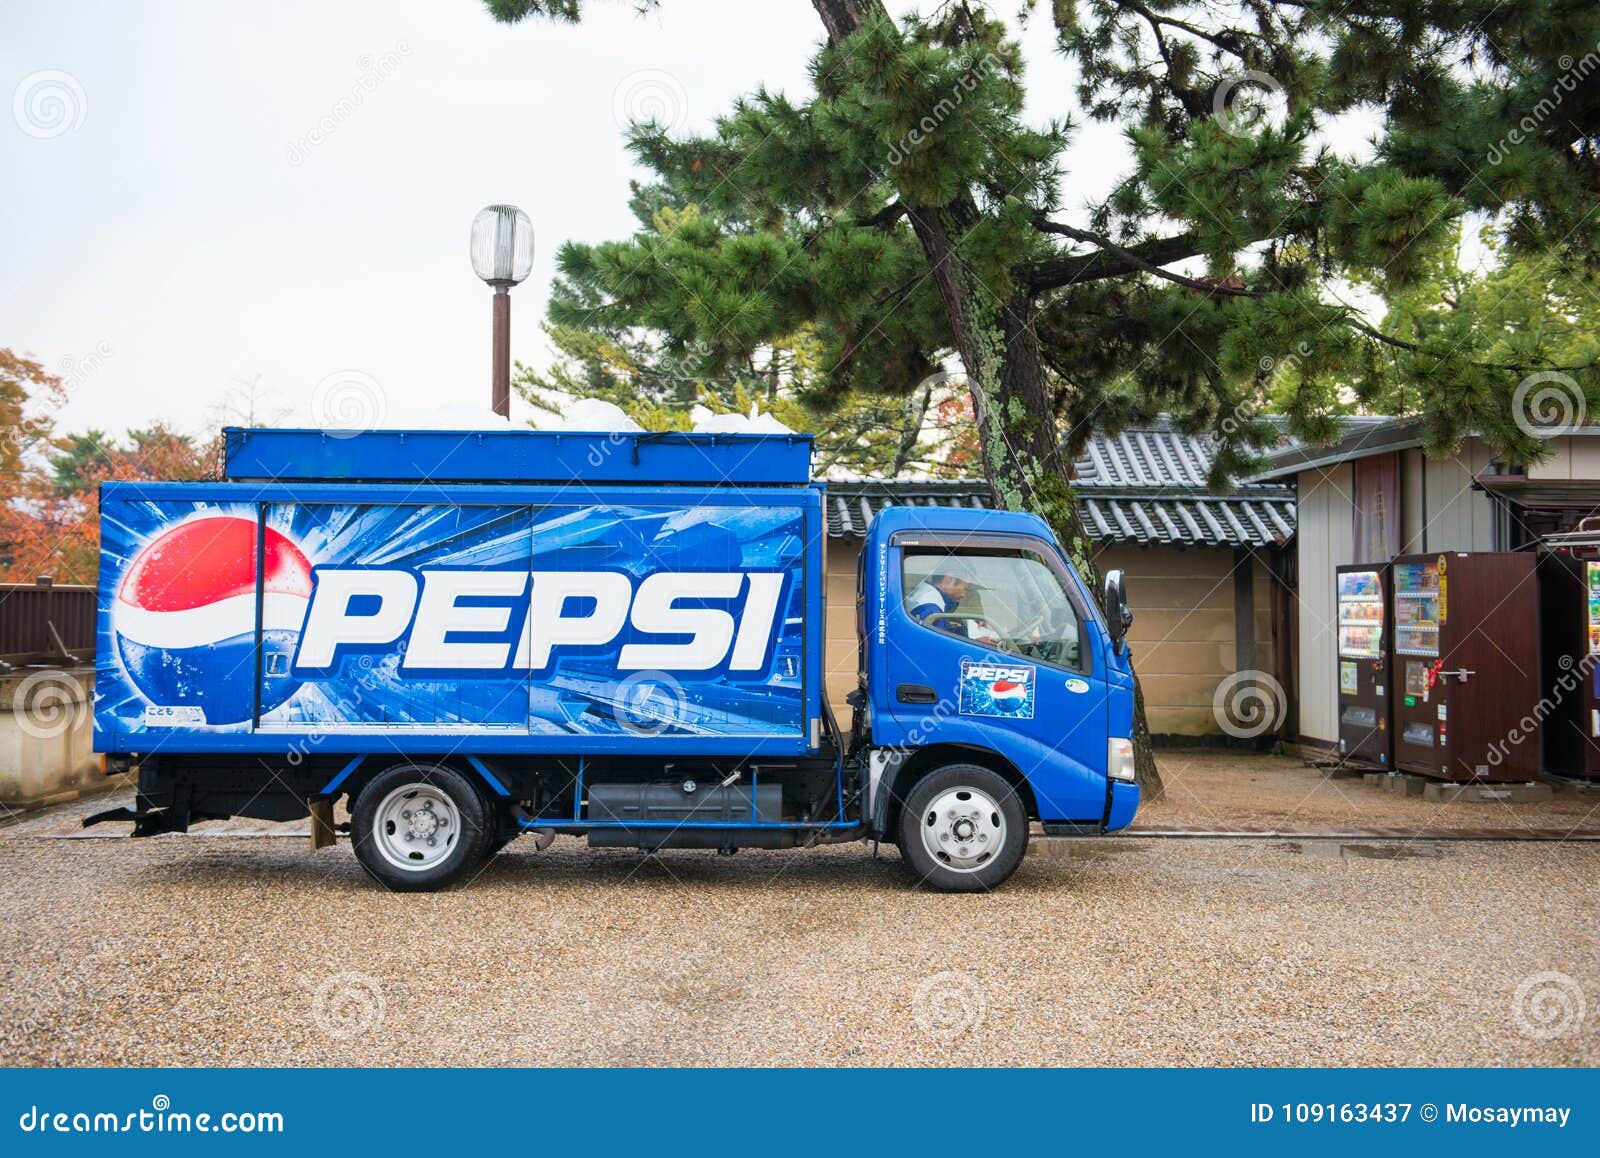 NEW RED  Style Pepsi Cases on a Plastic Pepsi Truck with hand cart 